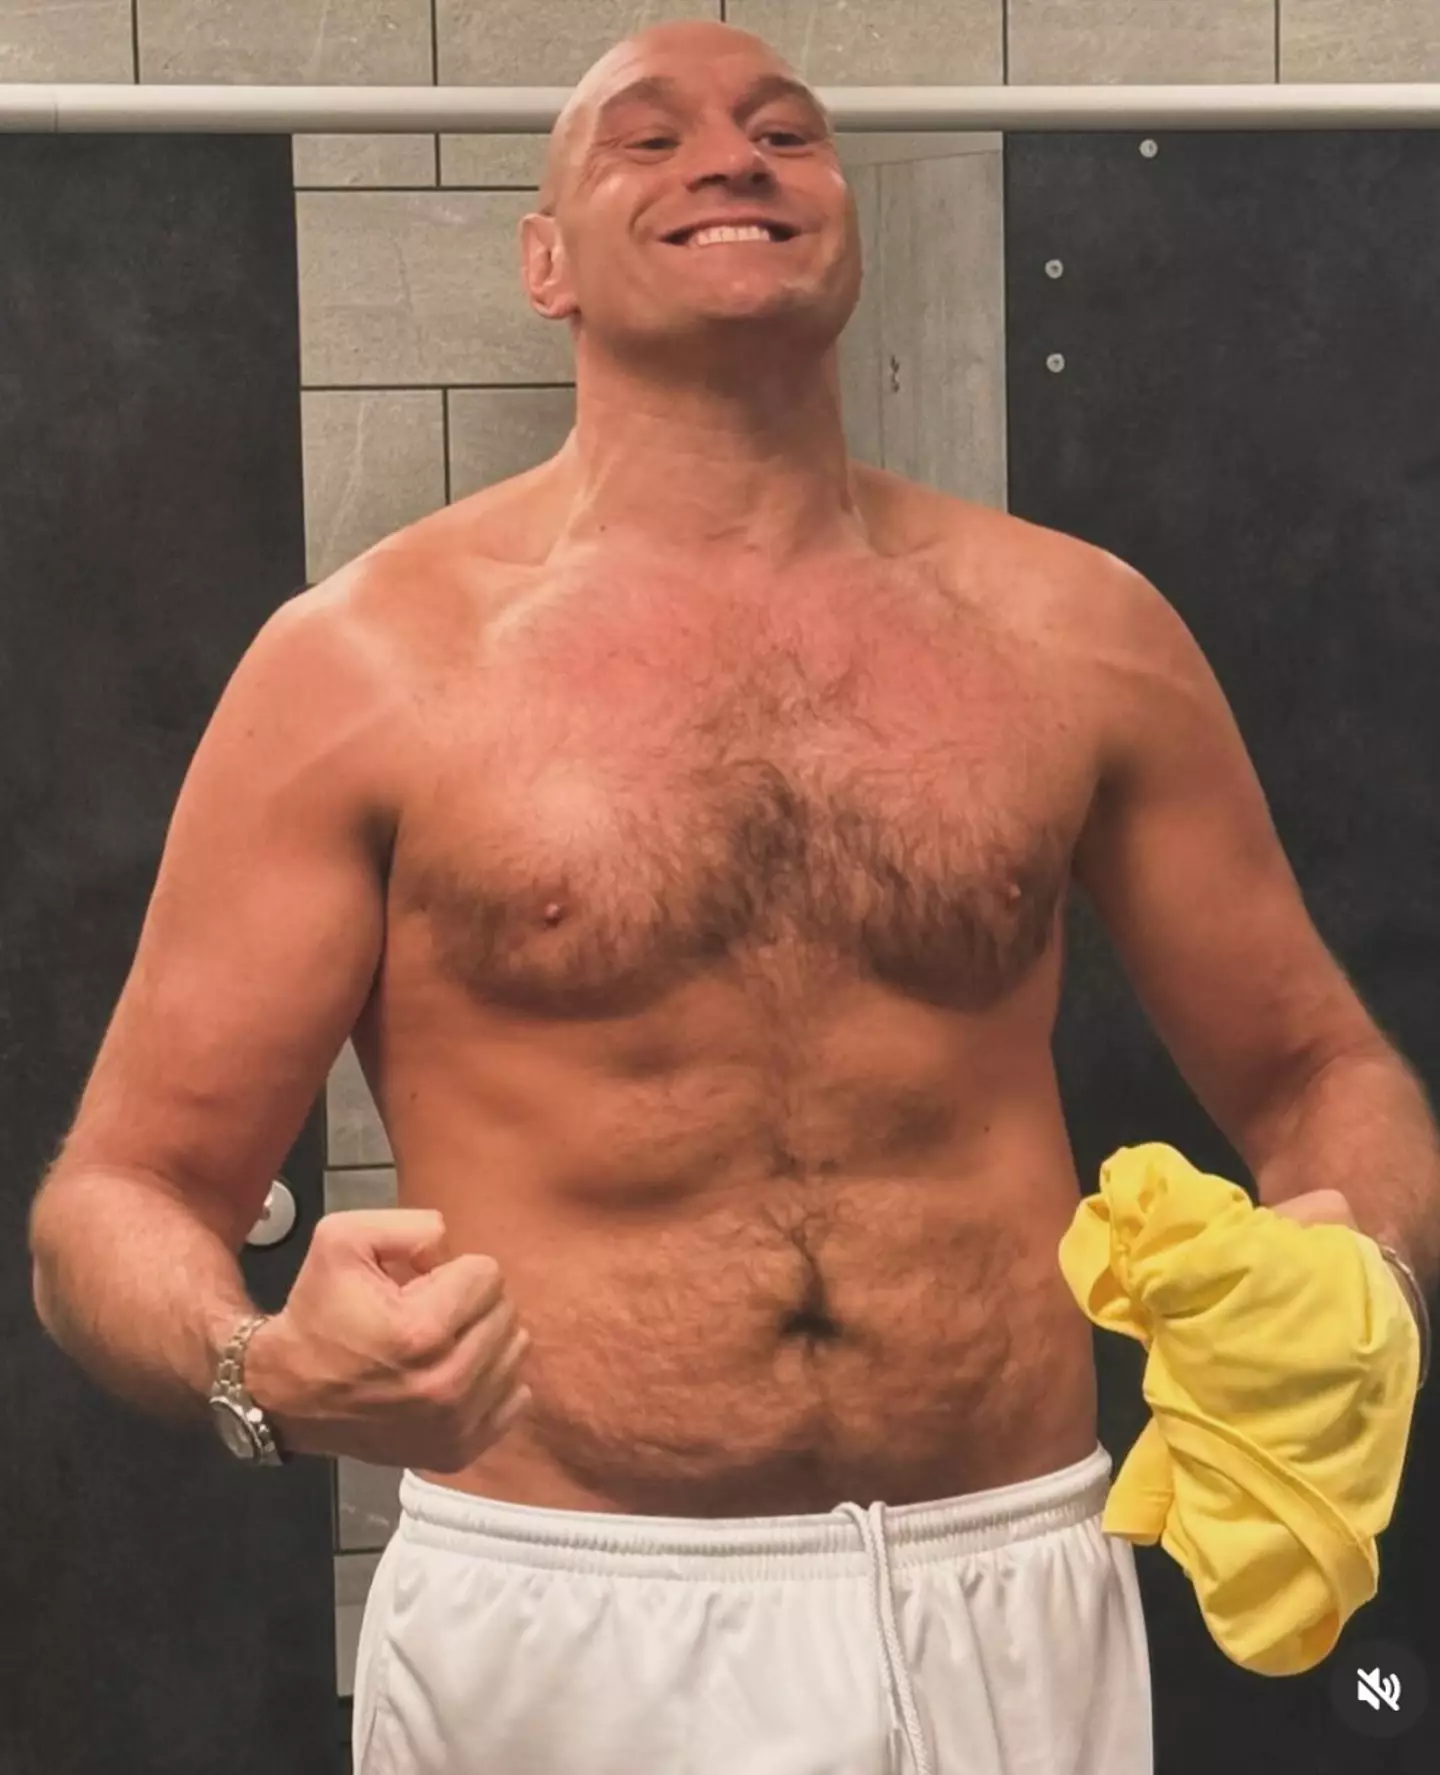 Tyson Fury has shown off his physique ahead of his fight against Oleksandr Usyk. Image: Tyson Fury